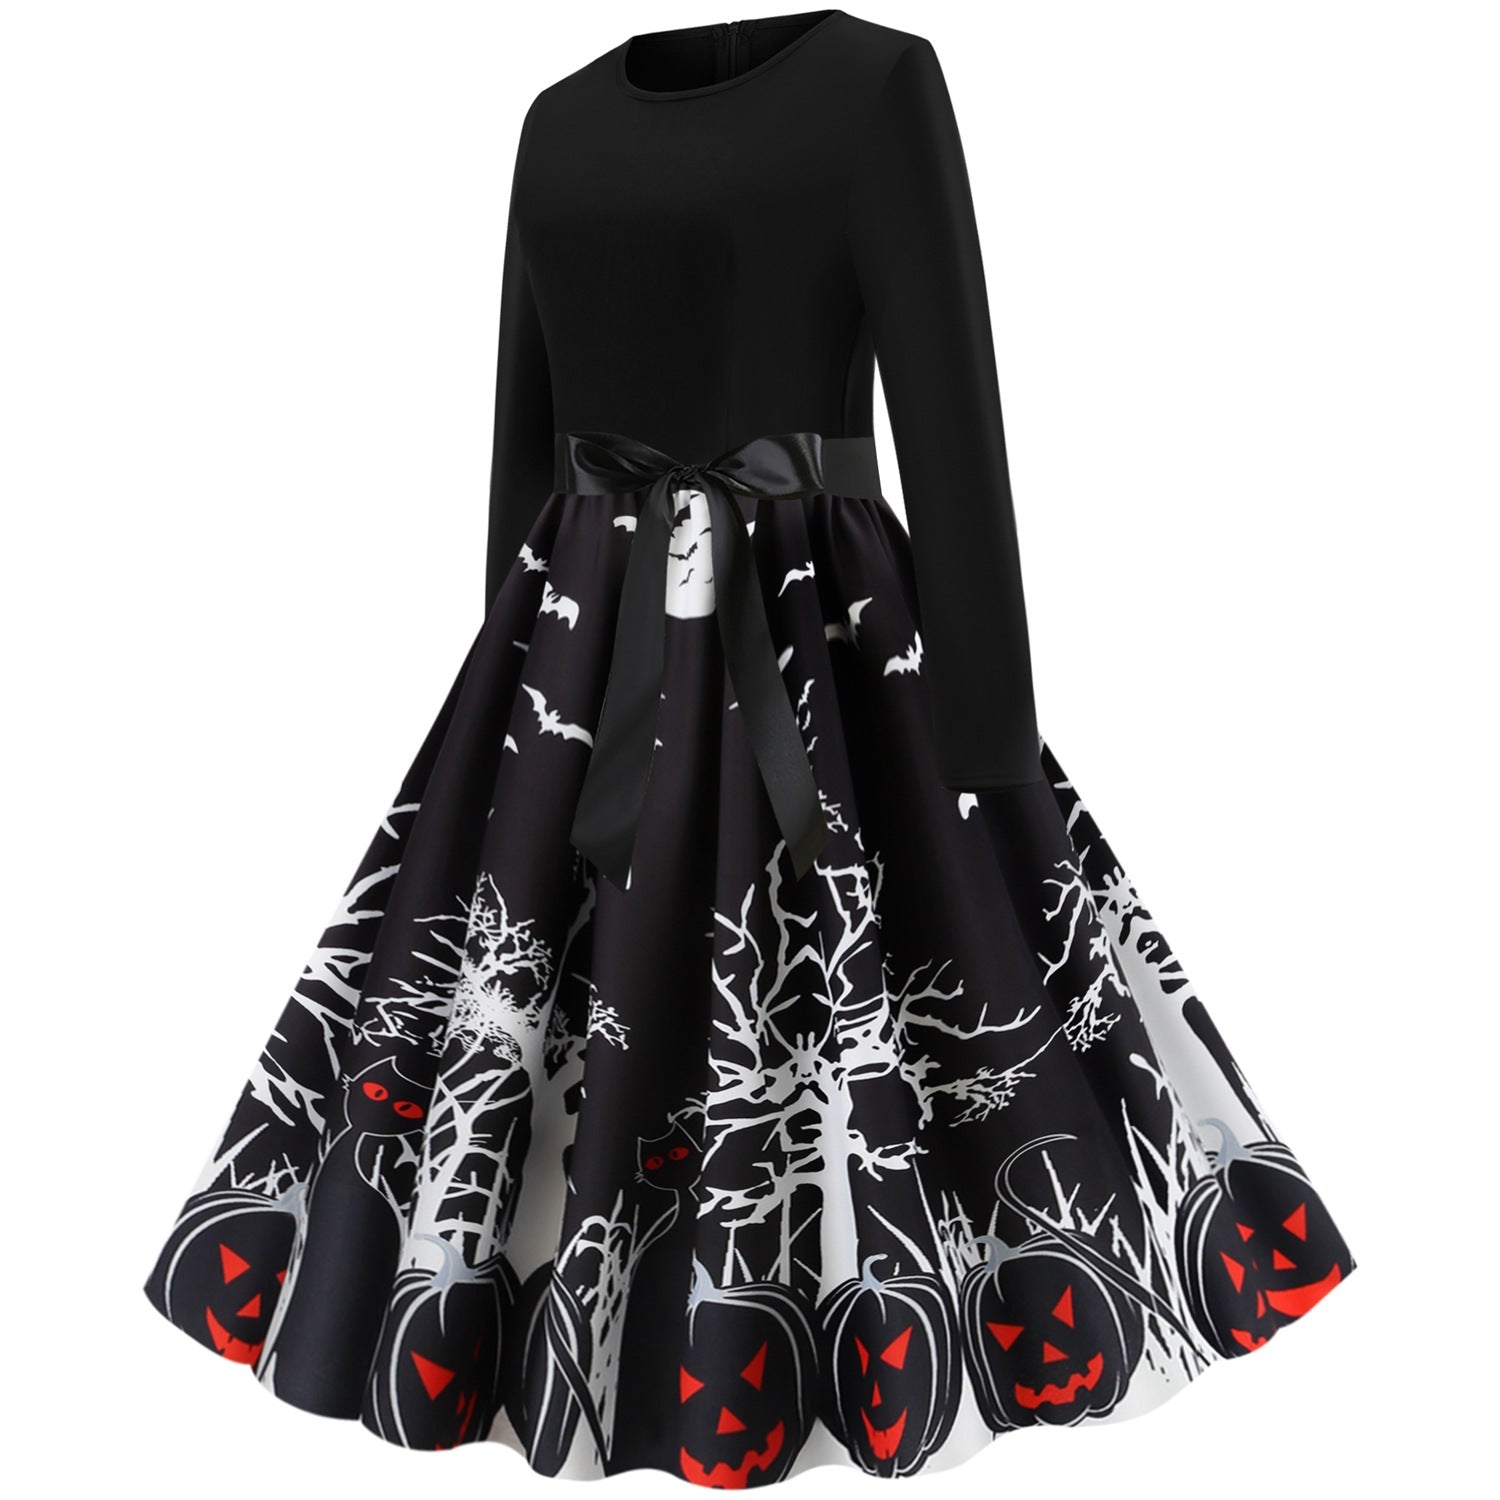 A Maramalive™ Halloween Retro Floral Print Swing Dress with pumpkins on it.